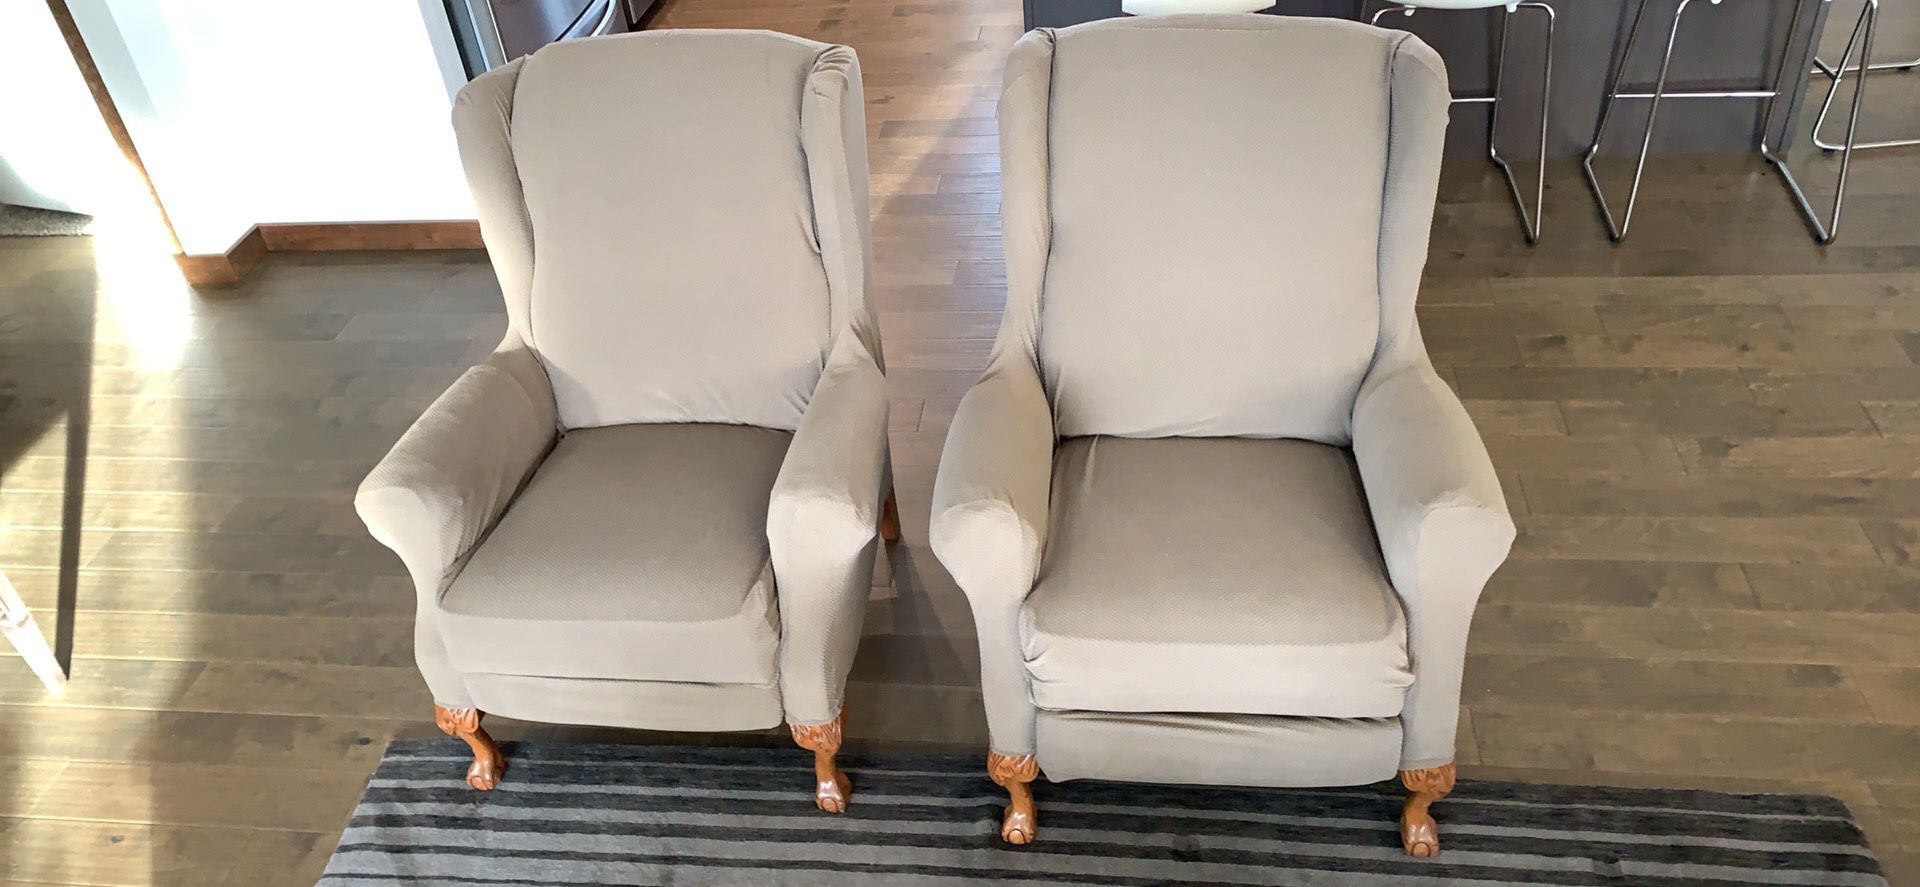 Recliners W/ Slipcovers